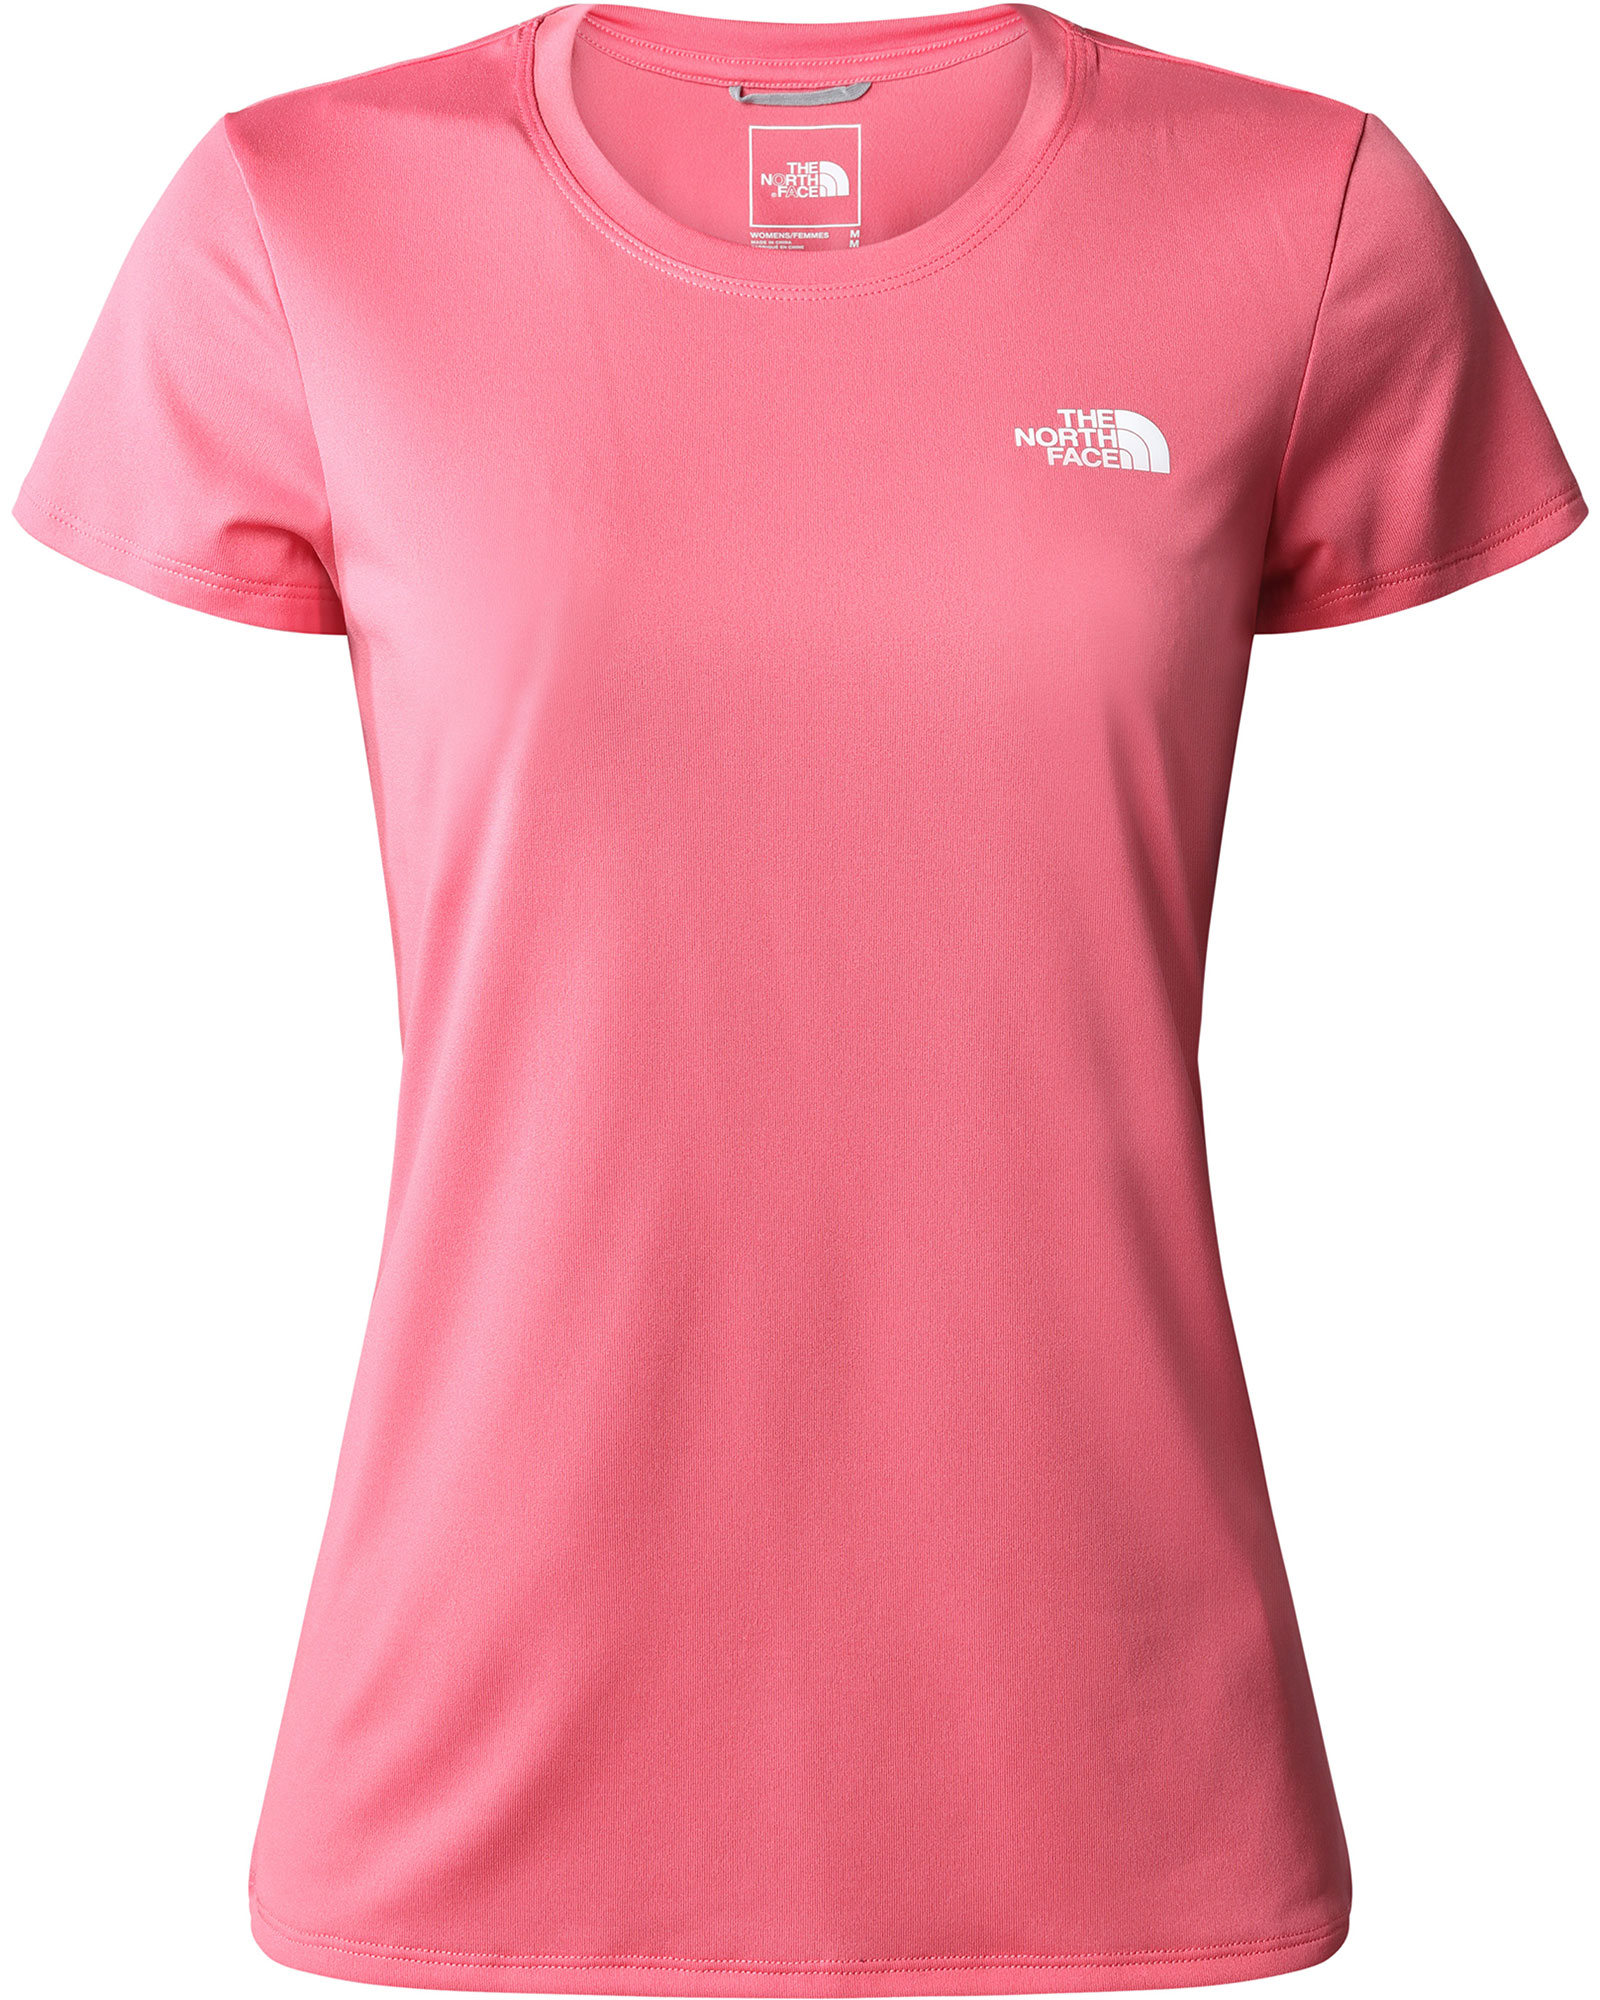 The North Face Reaxion Amp Women’s Crew T Shirt - Cosmo Pink XS